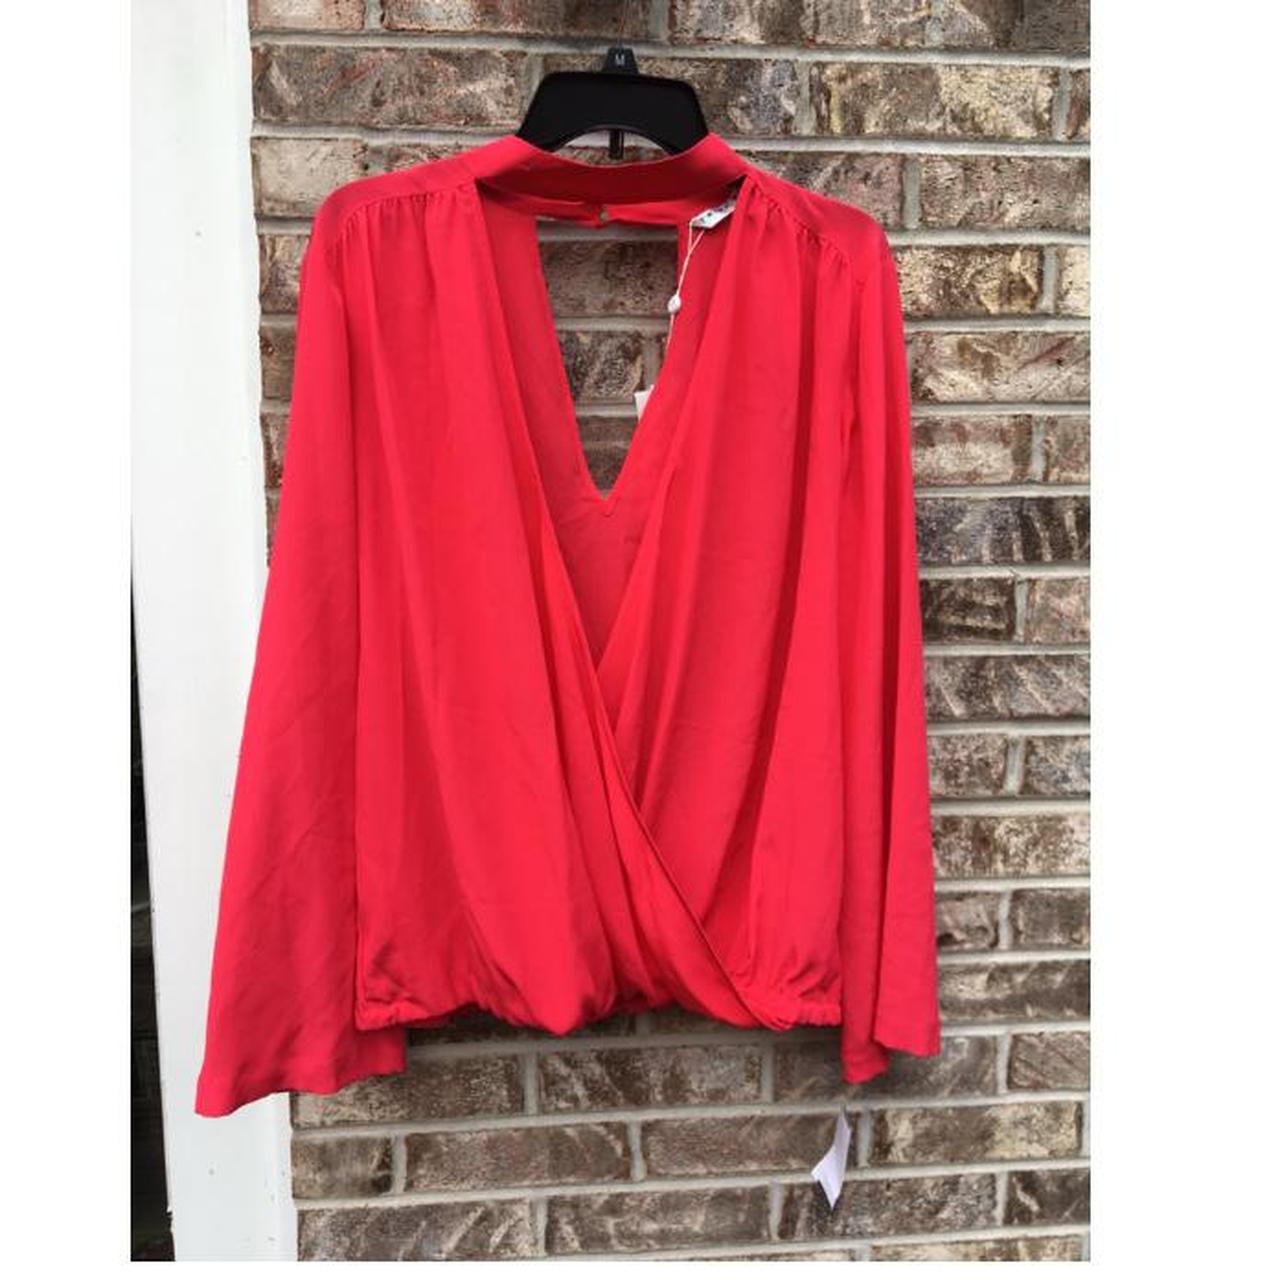 Product Image 1 - Hot pink/cherry draped top
Long sleeves
Plunging